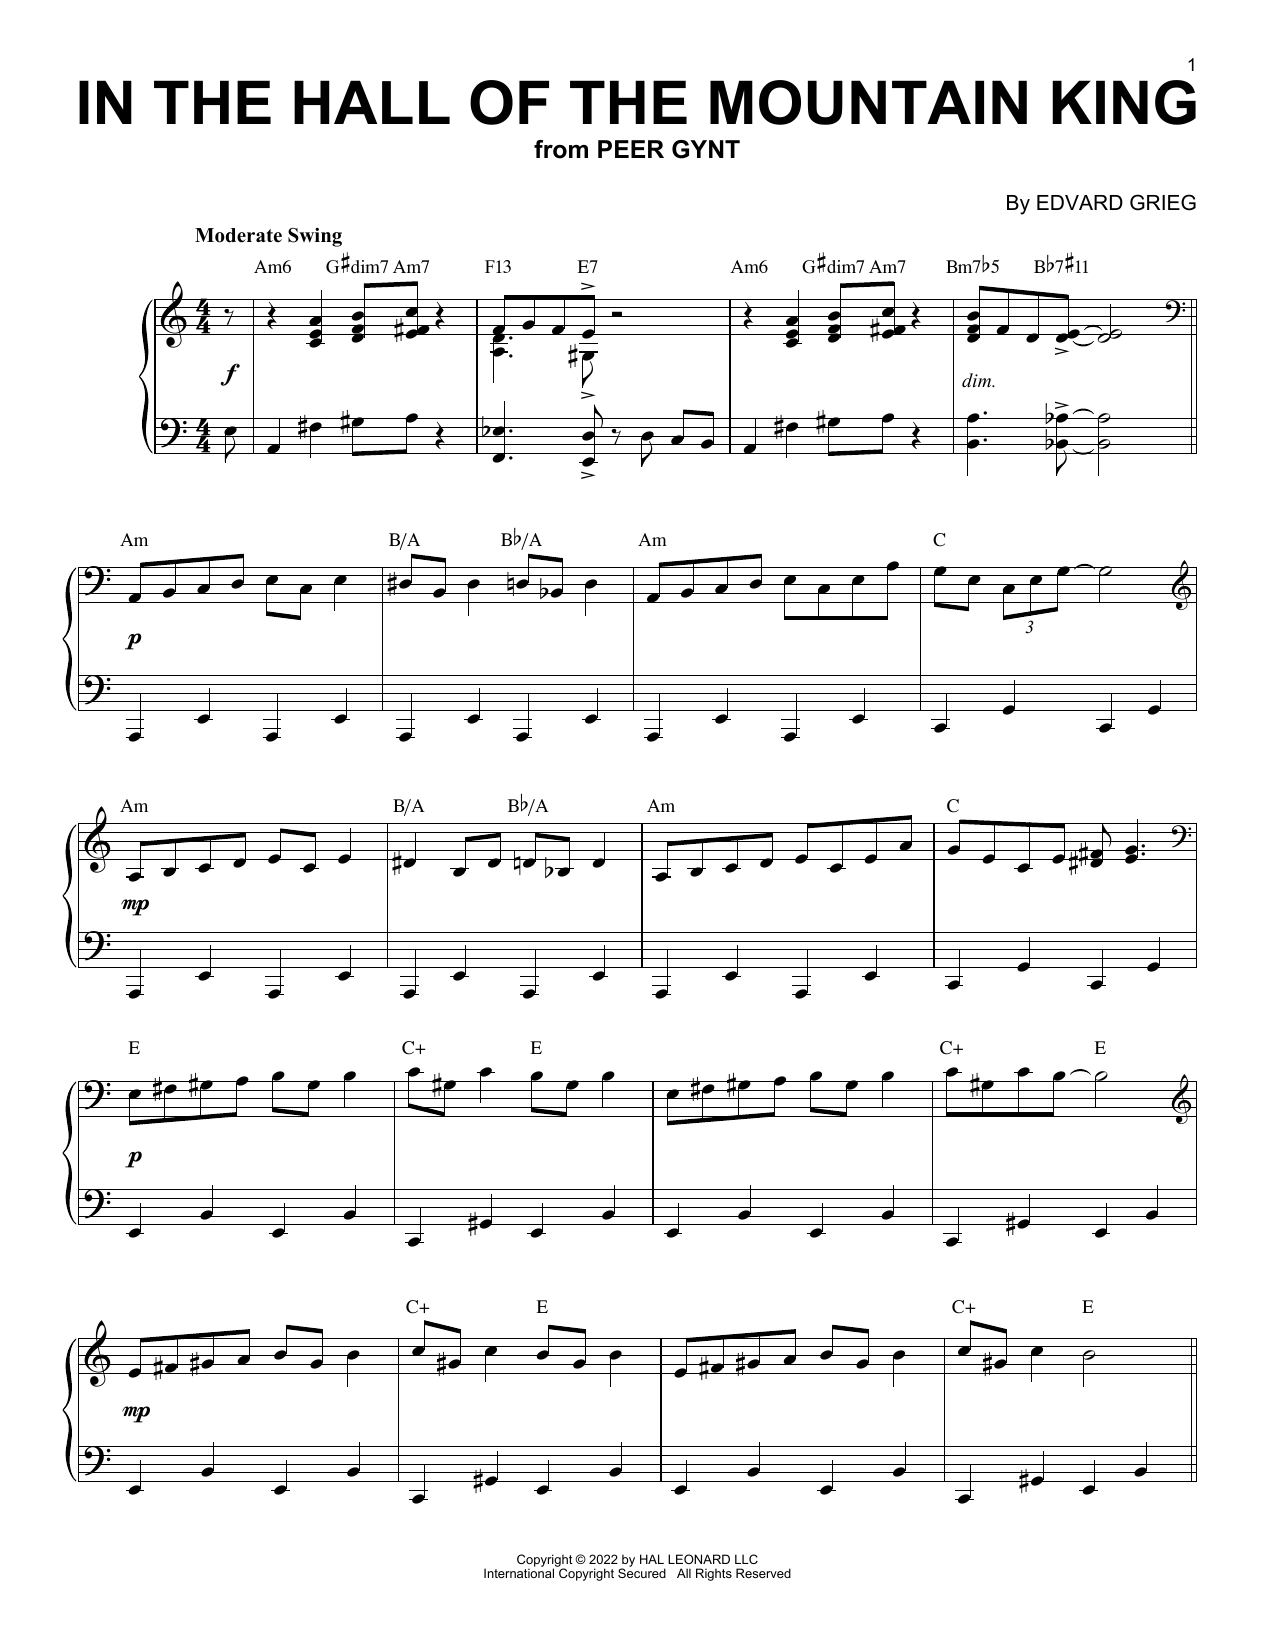 Download Edvard Grieg In The Hall Of The Mountain King [Jazz Sheet Music